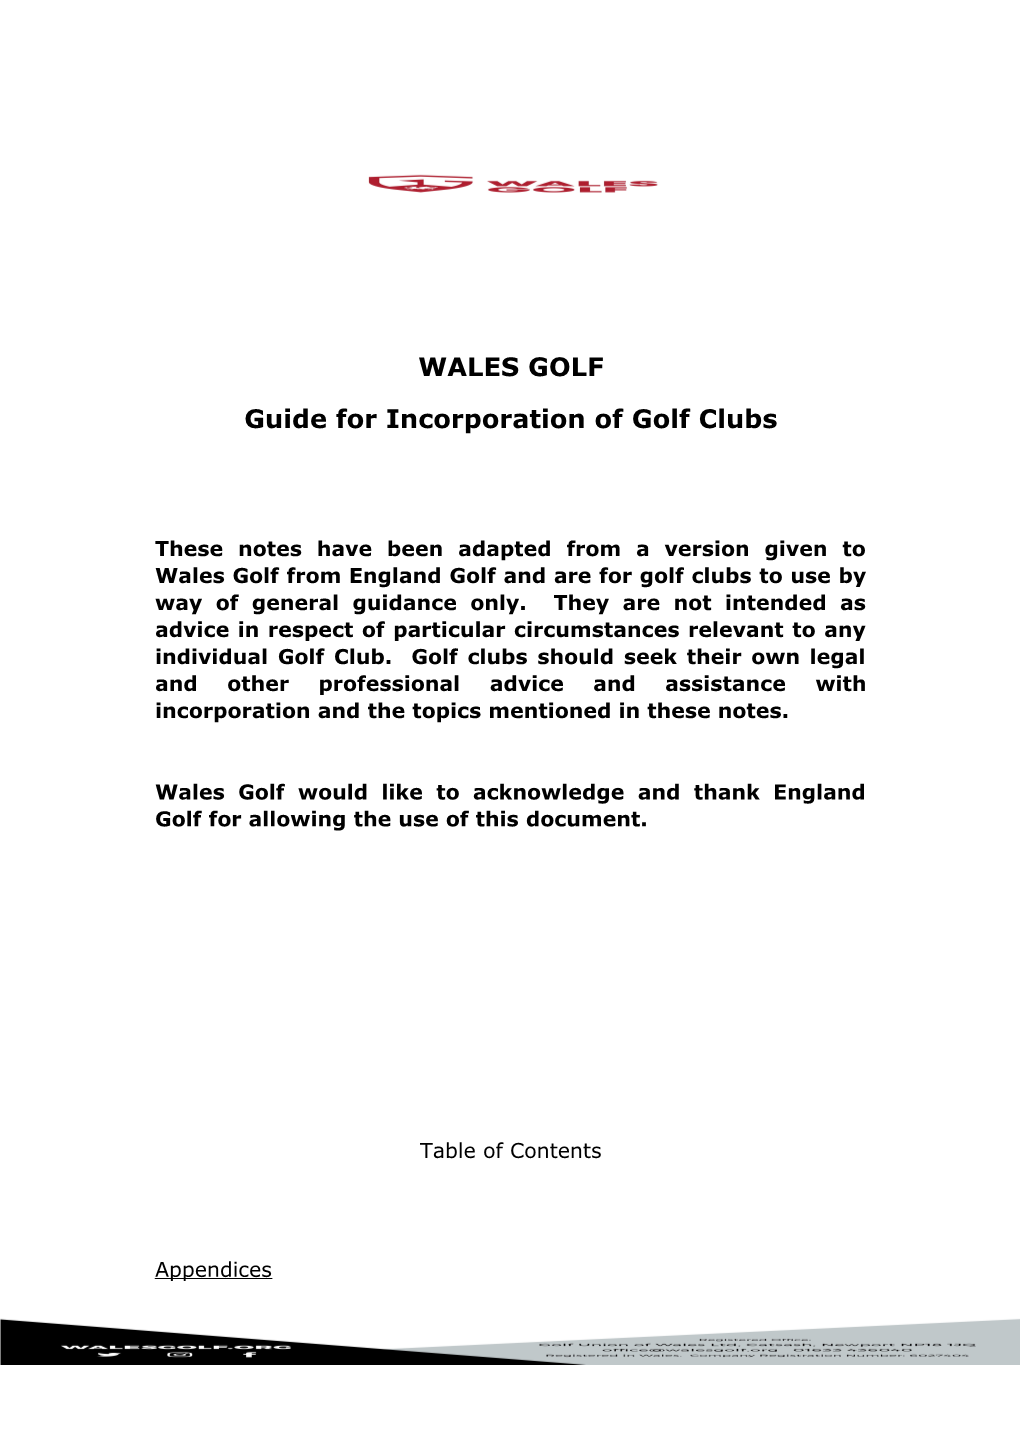 Guide for Incorporation of Golf Clubs